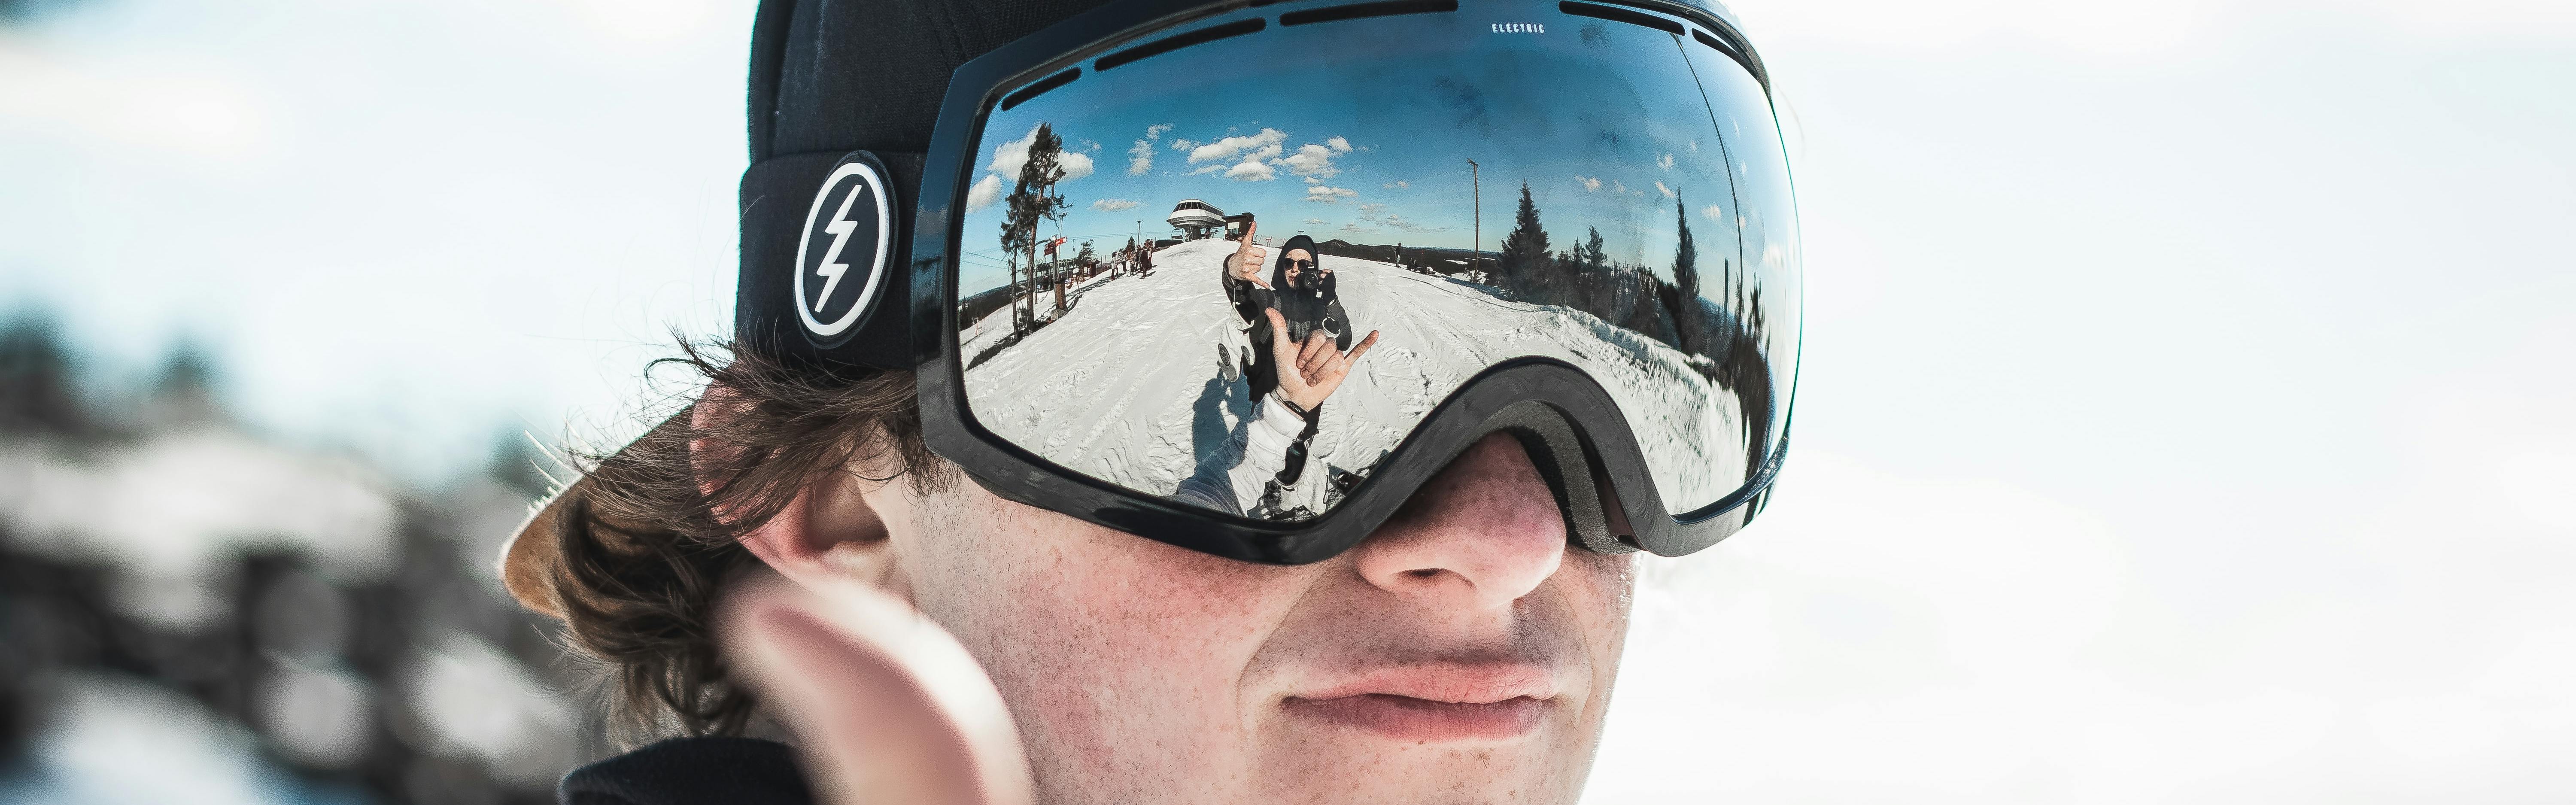 Close up of a snowboarders goggles. In the reflection of his goggles you can see his own hand and his friend waving with a camera. 